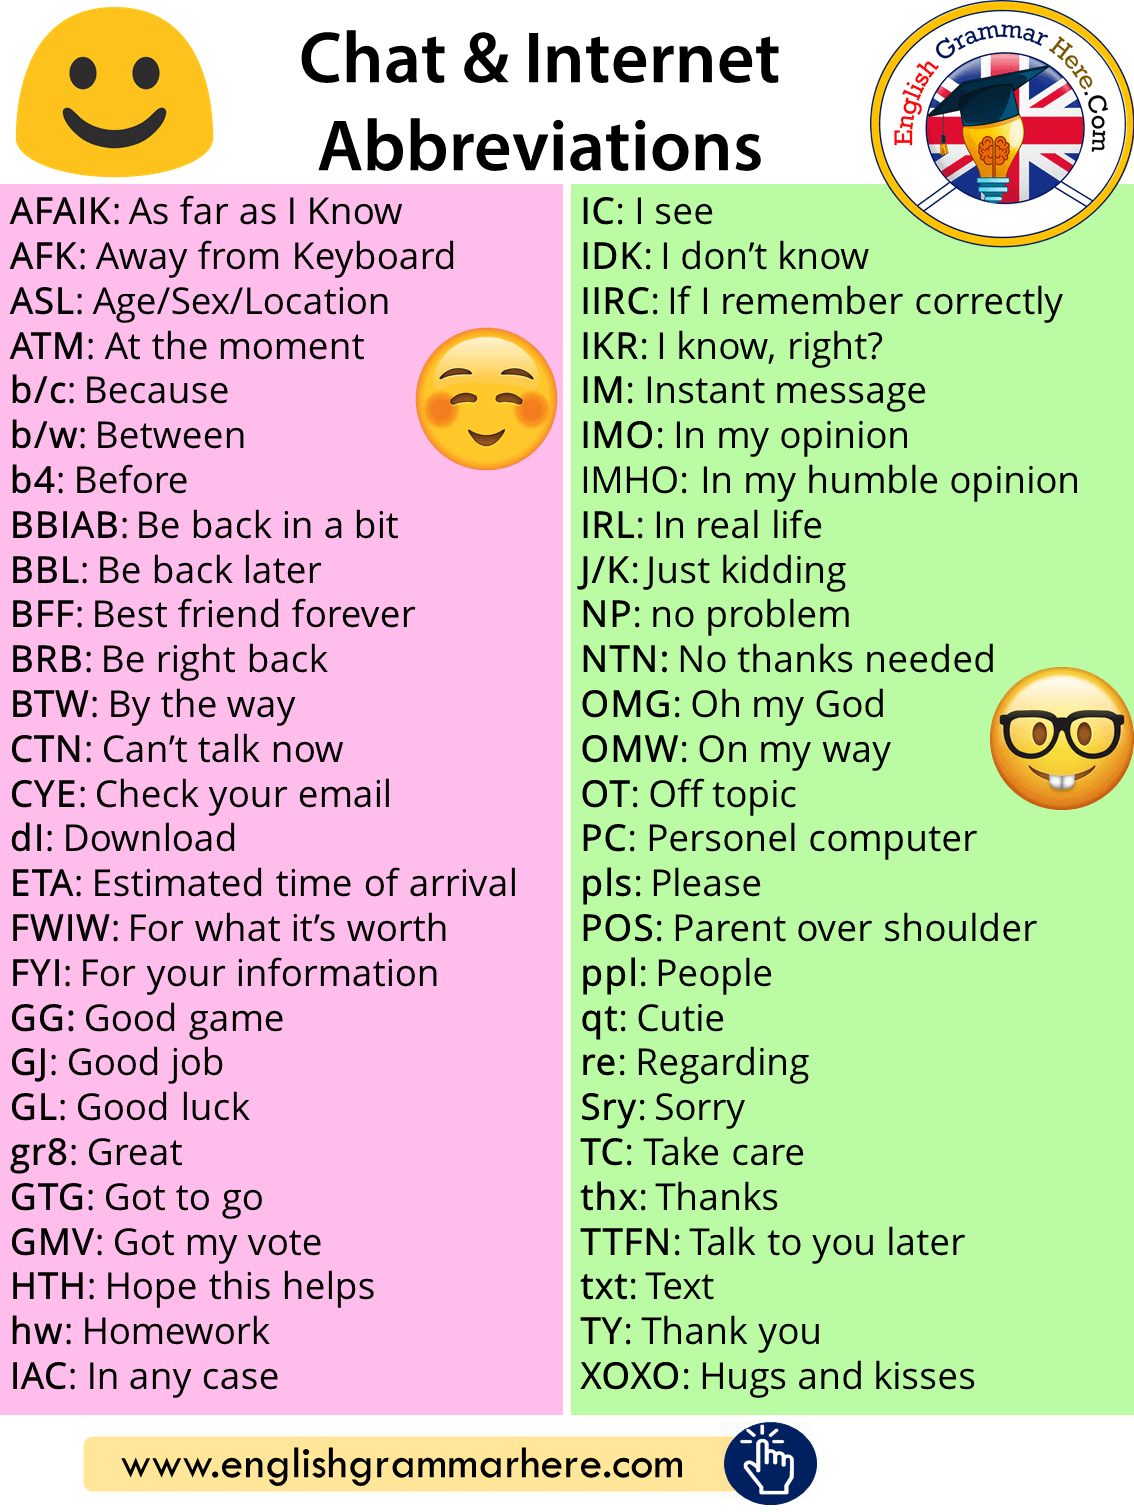 English Chat and Internet Abbreviations List